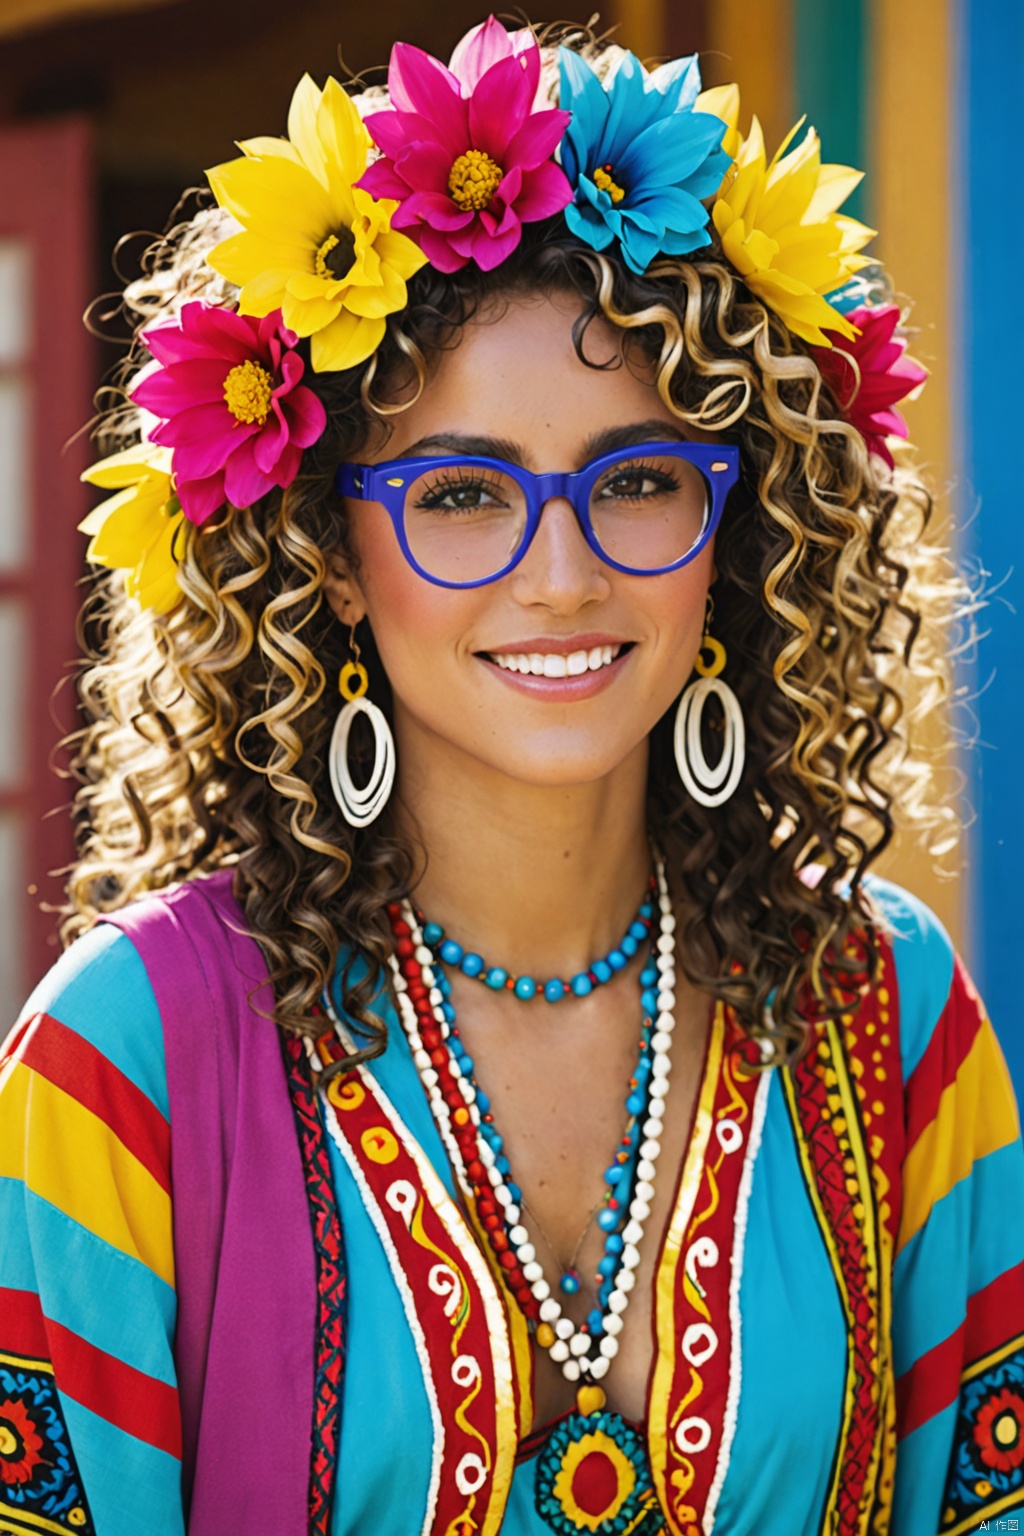  Diana, the Bahian woman, is a brunette with curly hair featuring blonde highlights at the tips. She wears glasses, has a slightly fuller figure, and dresses in colorful attire reminiscent of a gypsy outfit, reflecting her vibrant personality